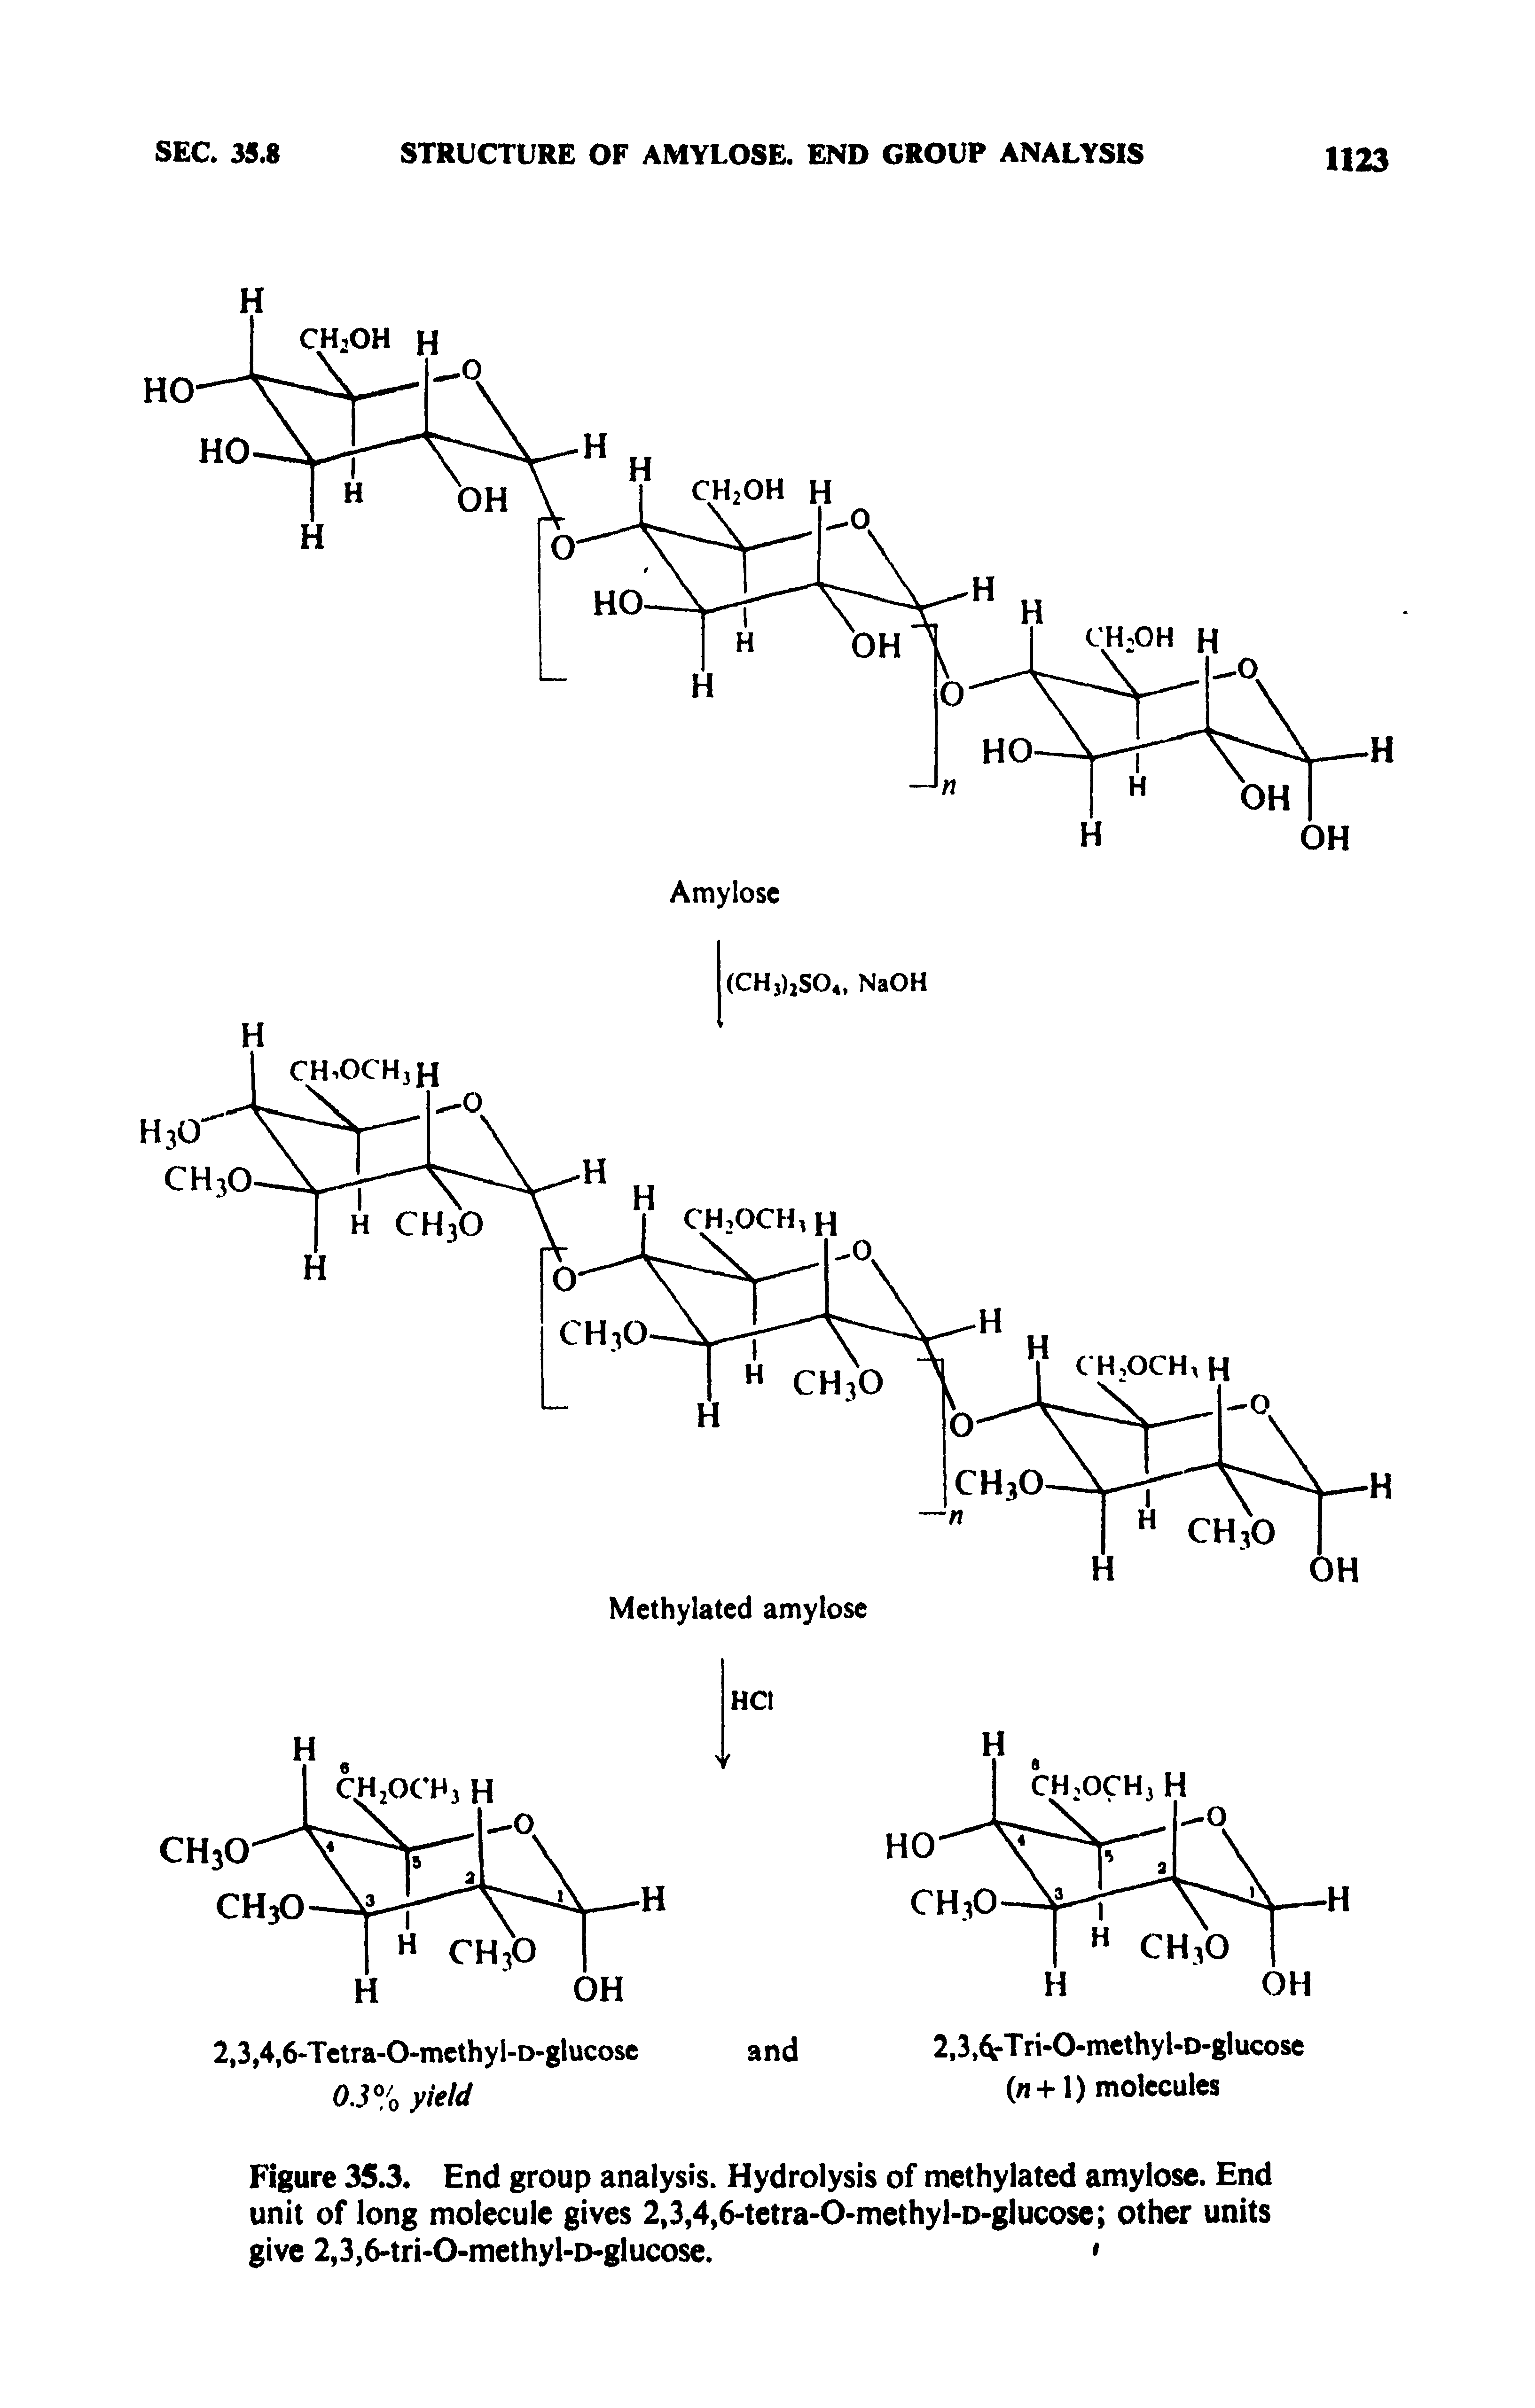 Figure 35.3. End group analysis. Hydrolysis of methylated amylose. End unit of long molecule gives 2,3,4,6-tetra-O-methyl-D-glucose other units give 2,3,6-tri-O-methyl-D-glucose. ...